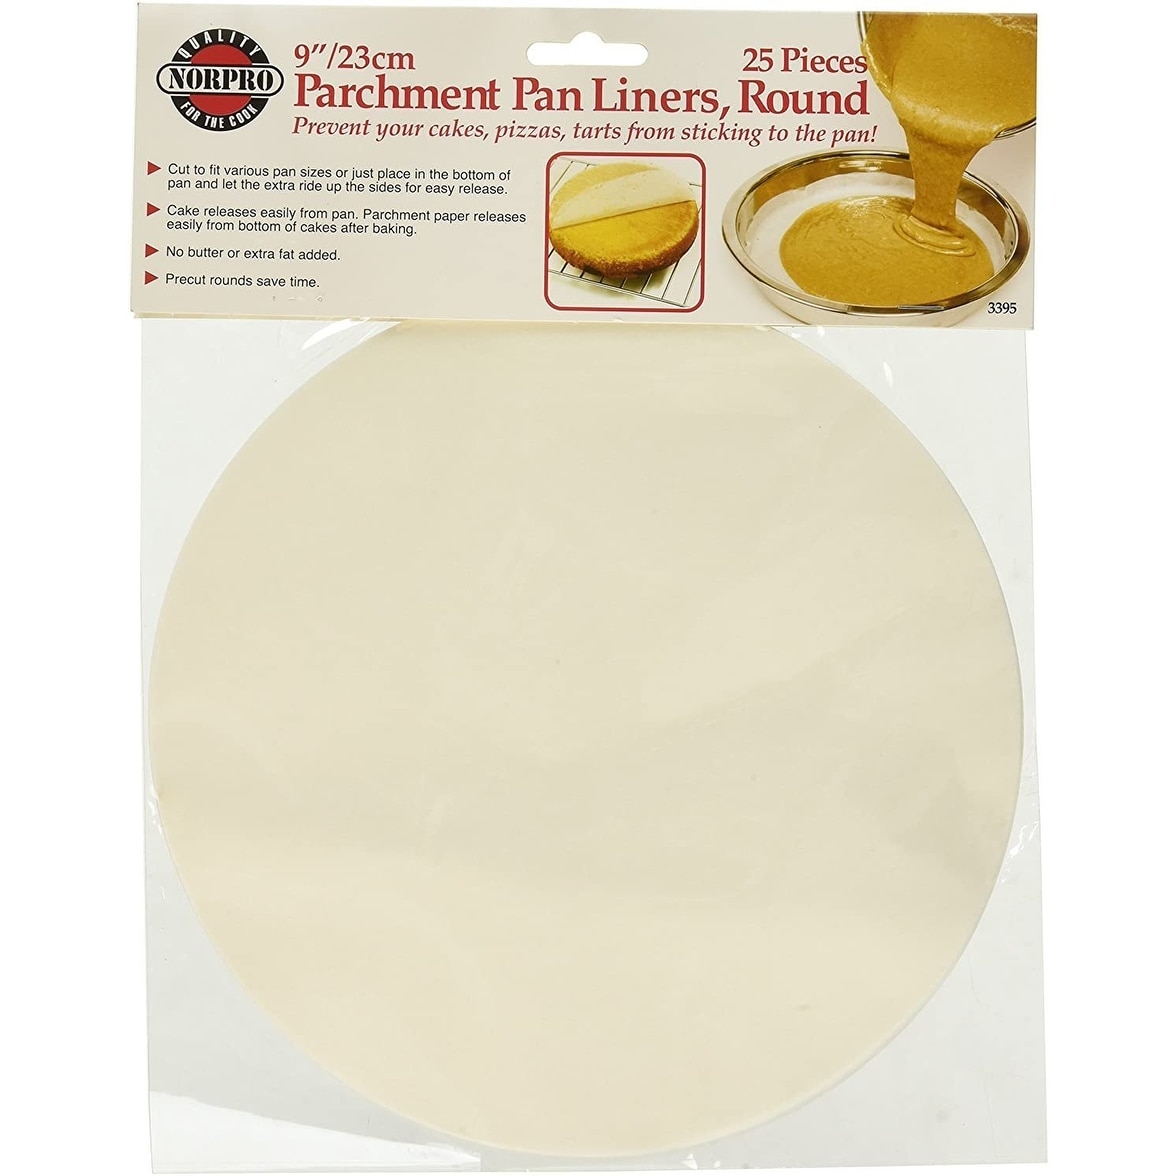 https://ak1.ostkcdn.com/images/products/is/images/direct/2306558e88257a404275e60e9adfb0bd825ffacf/Norpro-9%22-Round-Parchment-Paper-Cake-Pizza-Tart-Baking-Pan-Liners---25-Pack.jpg